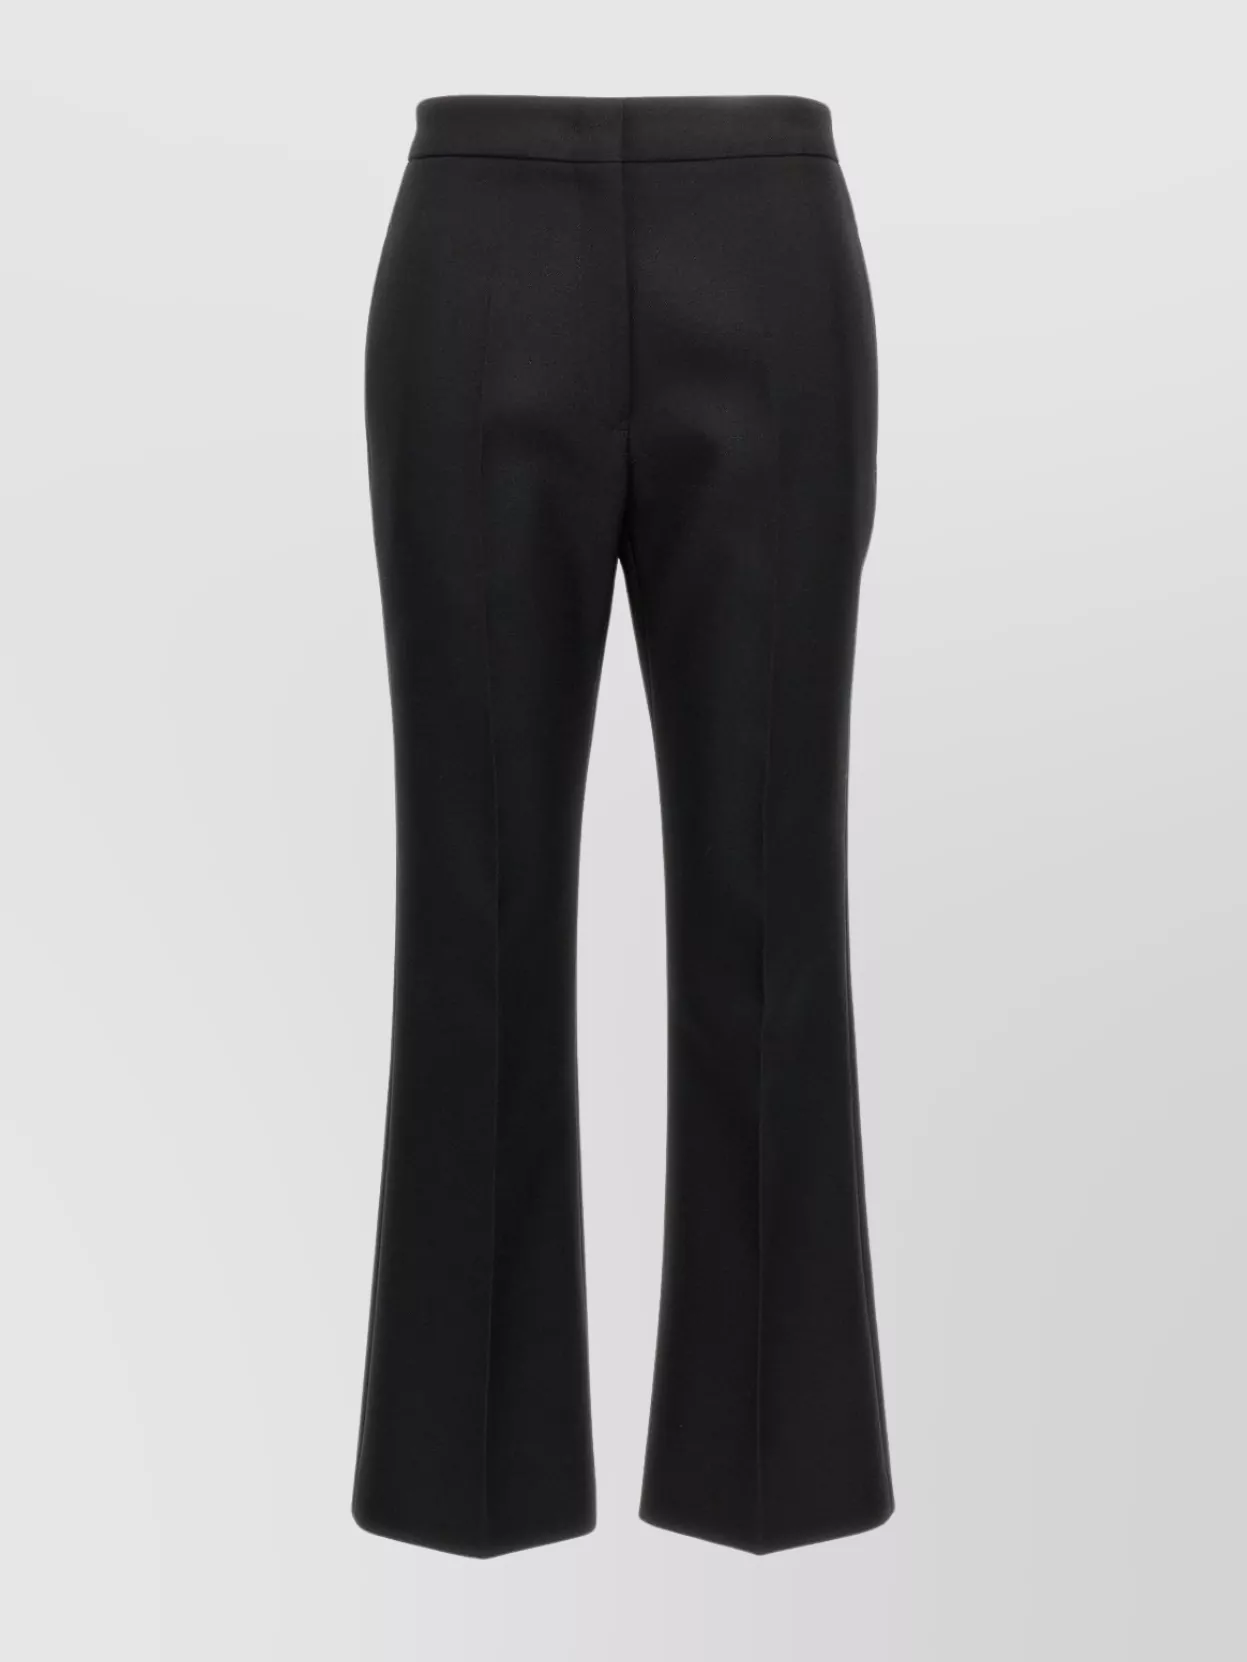 Jil Sander High Waist Flared Wool Trousers With Front Crease